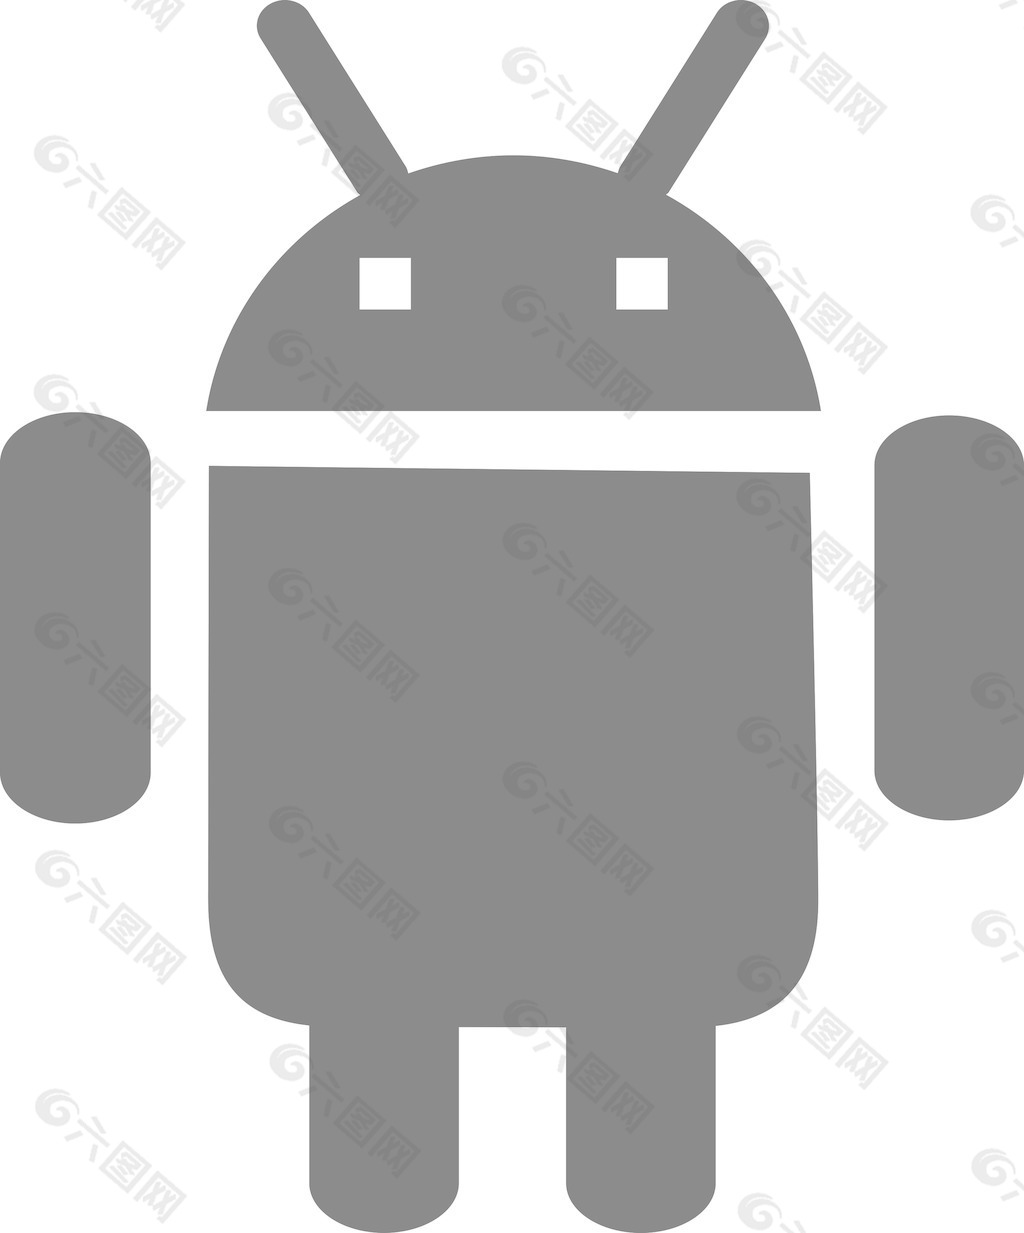 Android字形图标